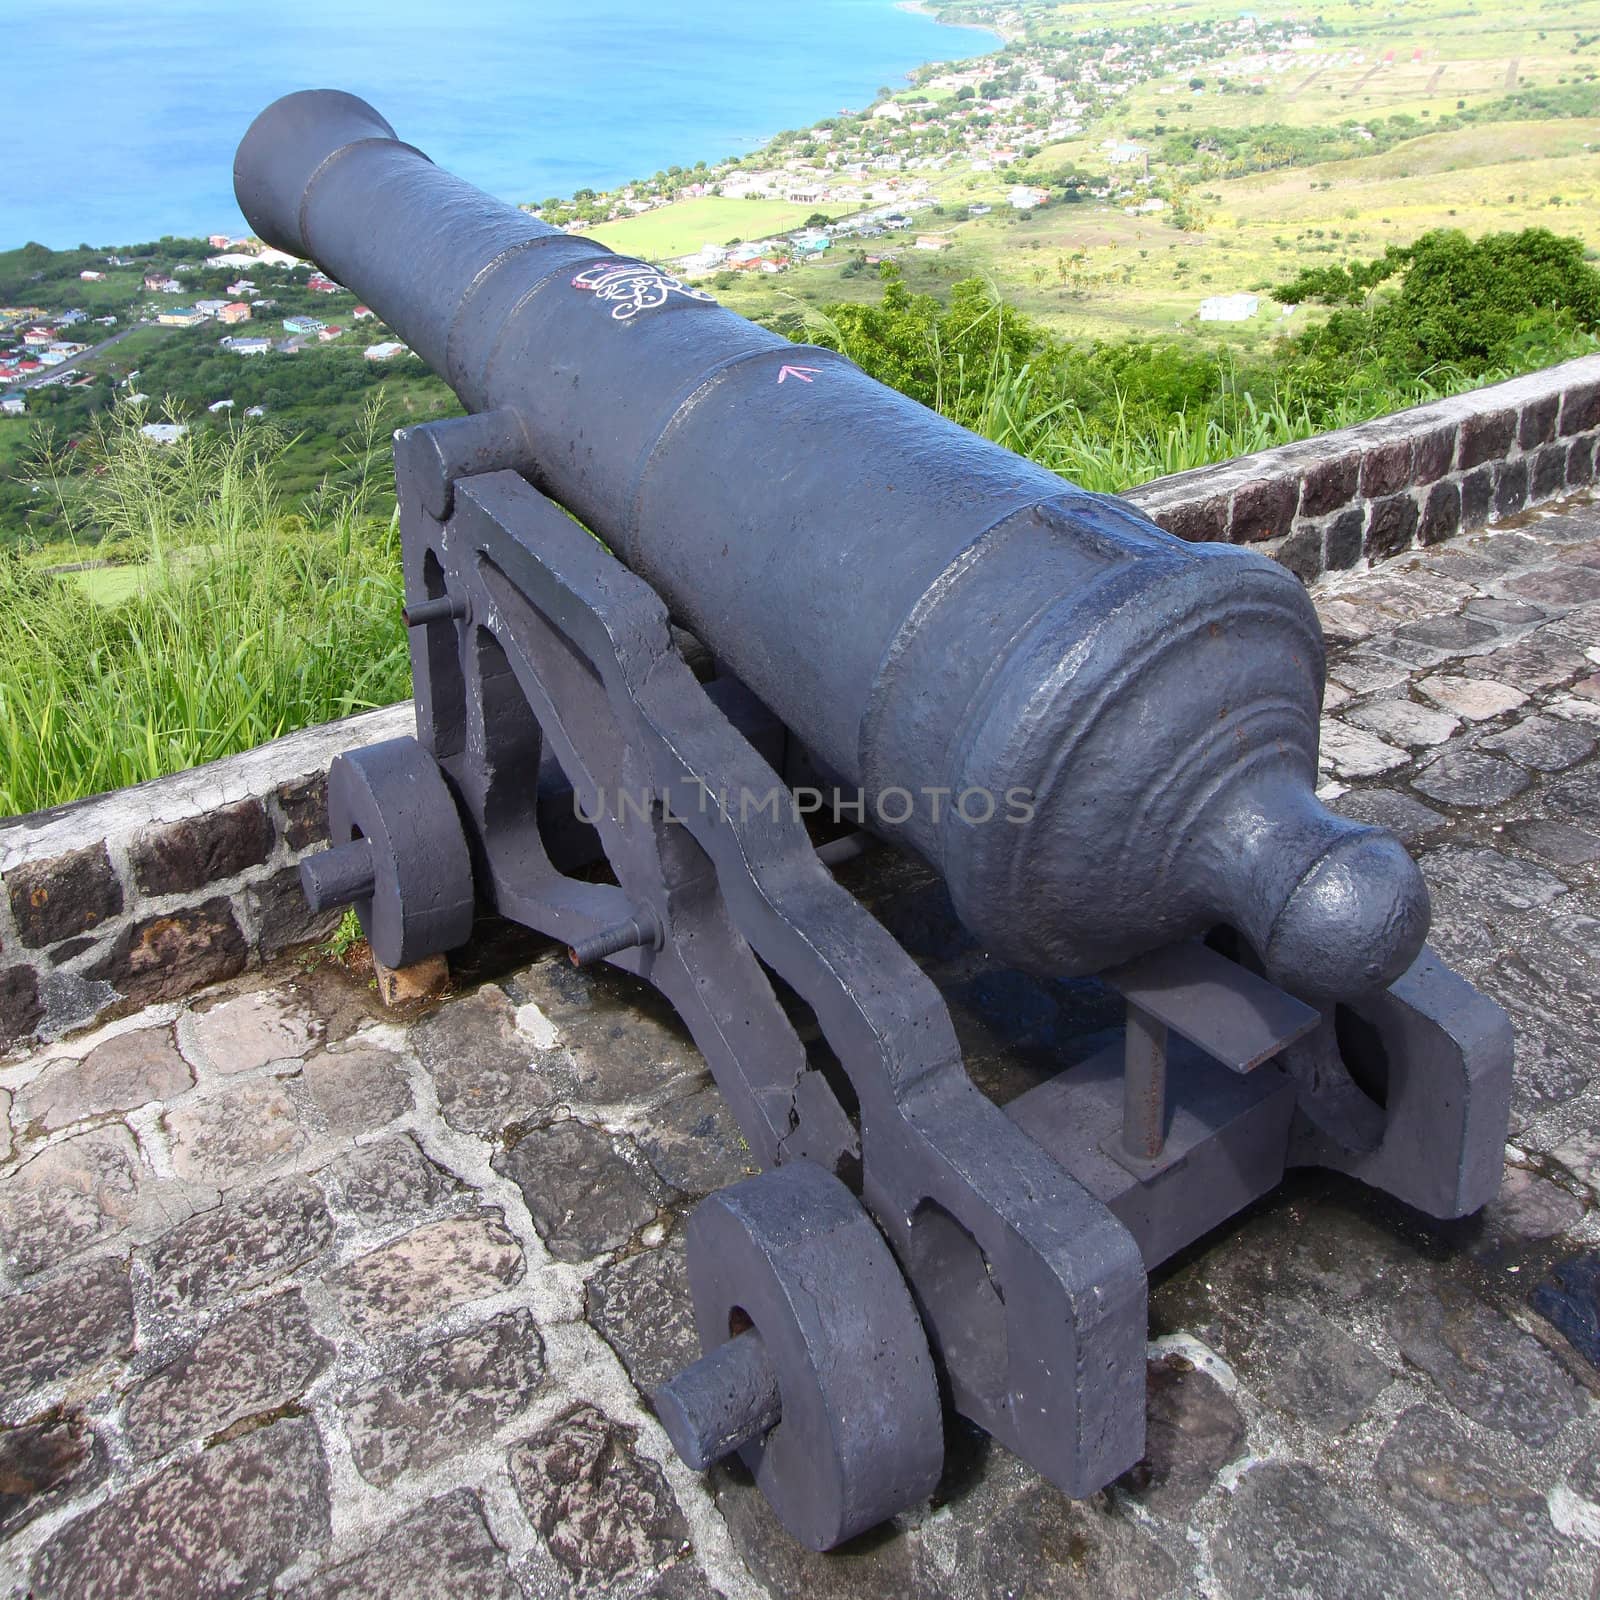 Brimstone Hill Fortress - St Kitts by Wirepec